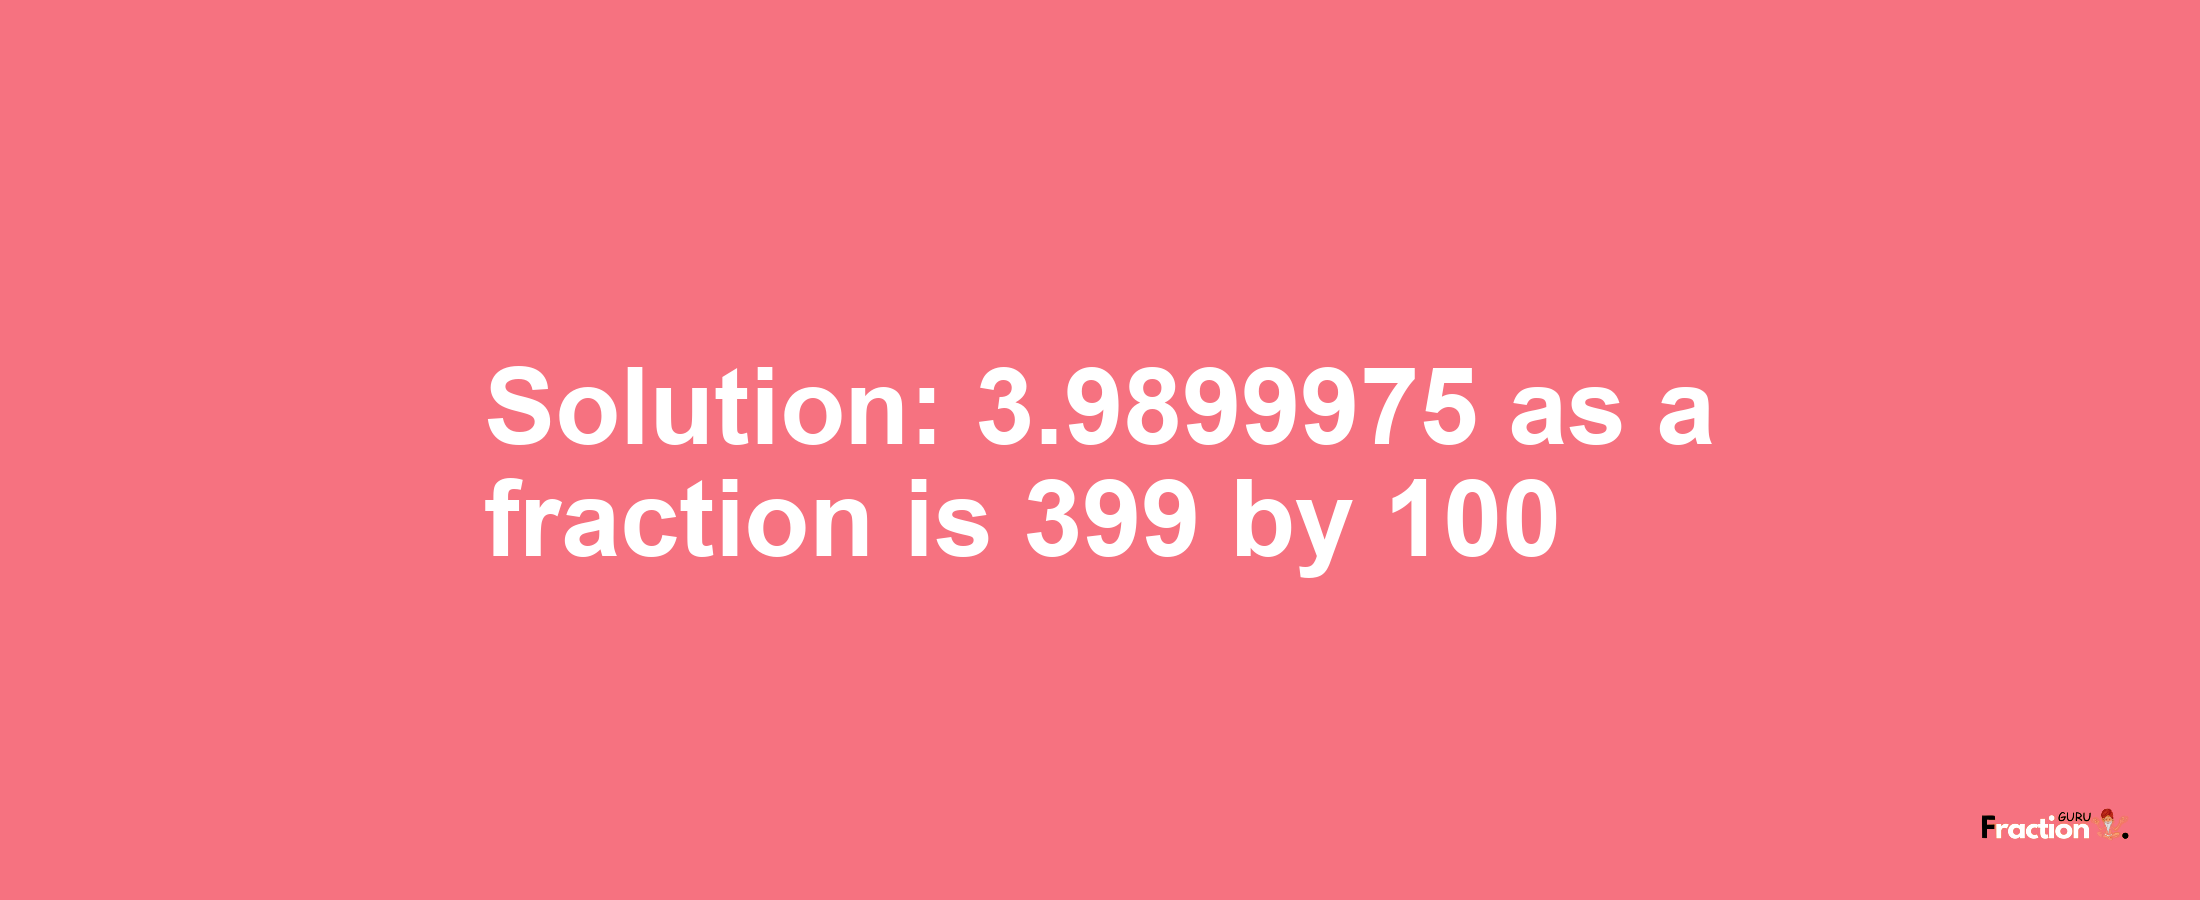 Solution:3.9899975 as a fraction is 399/100